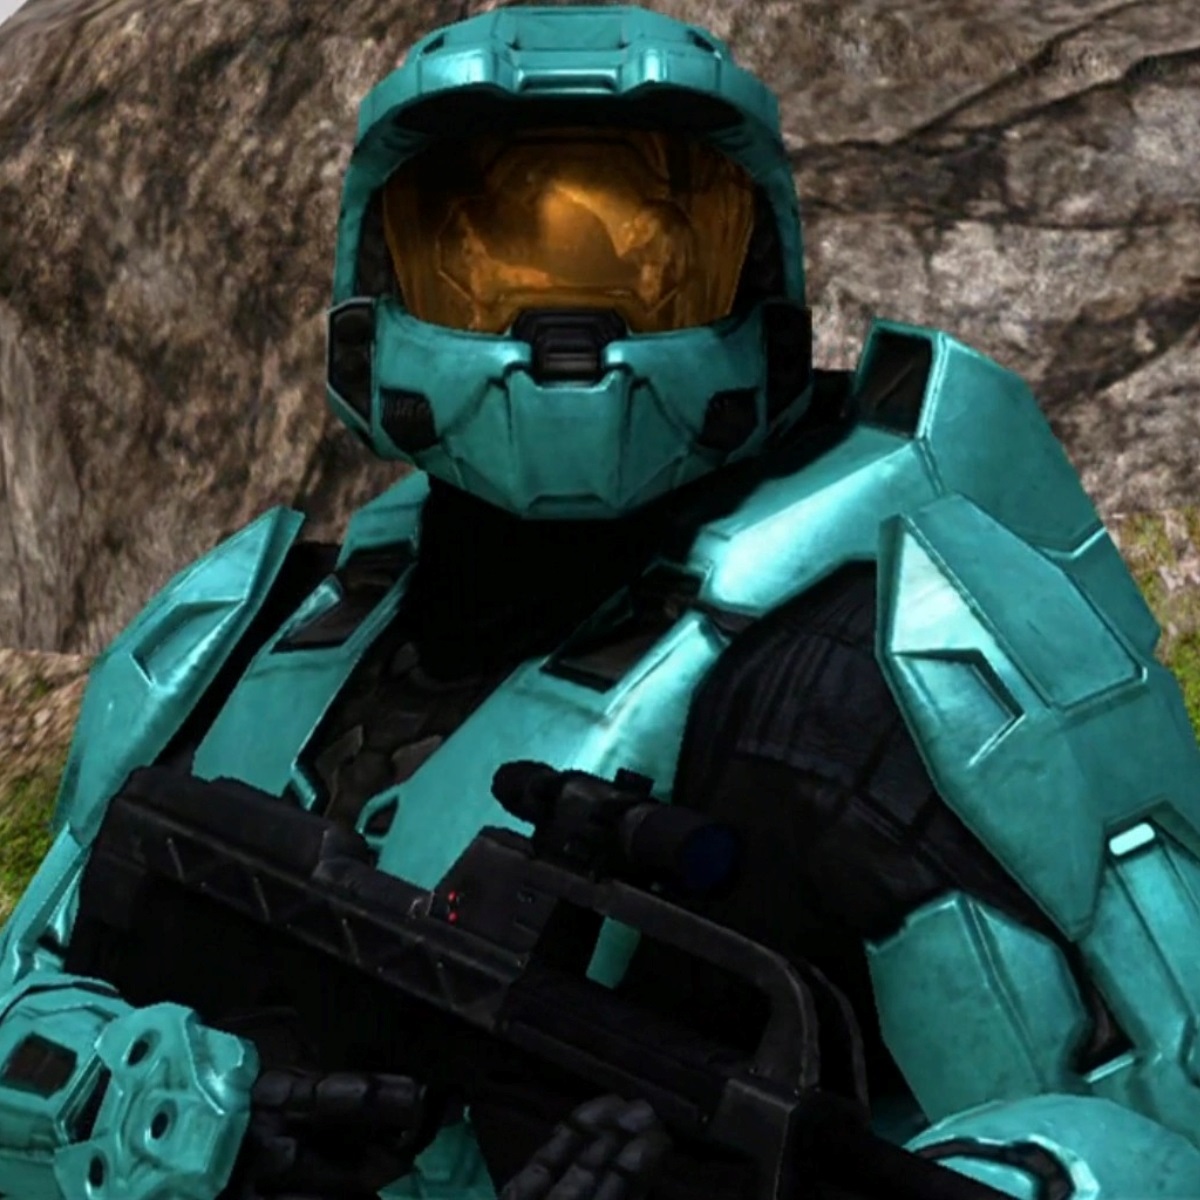 21-facts-about-lavernius-tucker-red-vs-blue